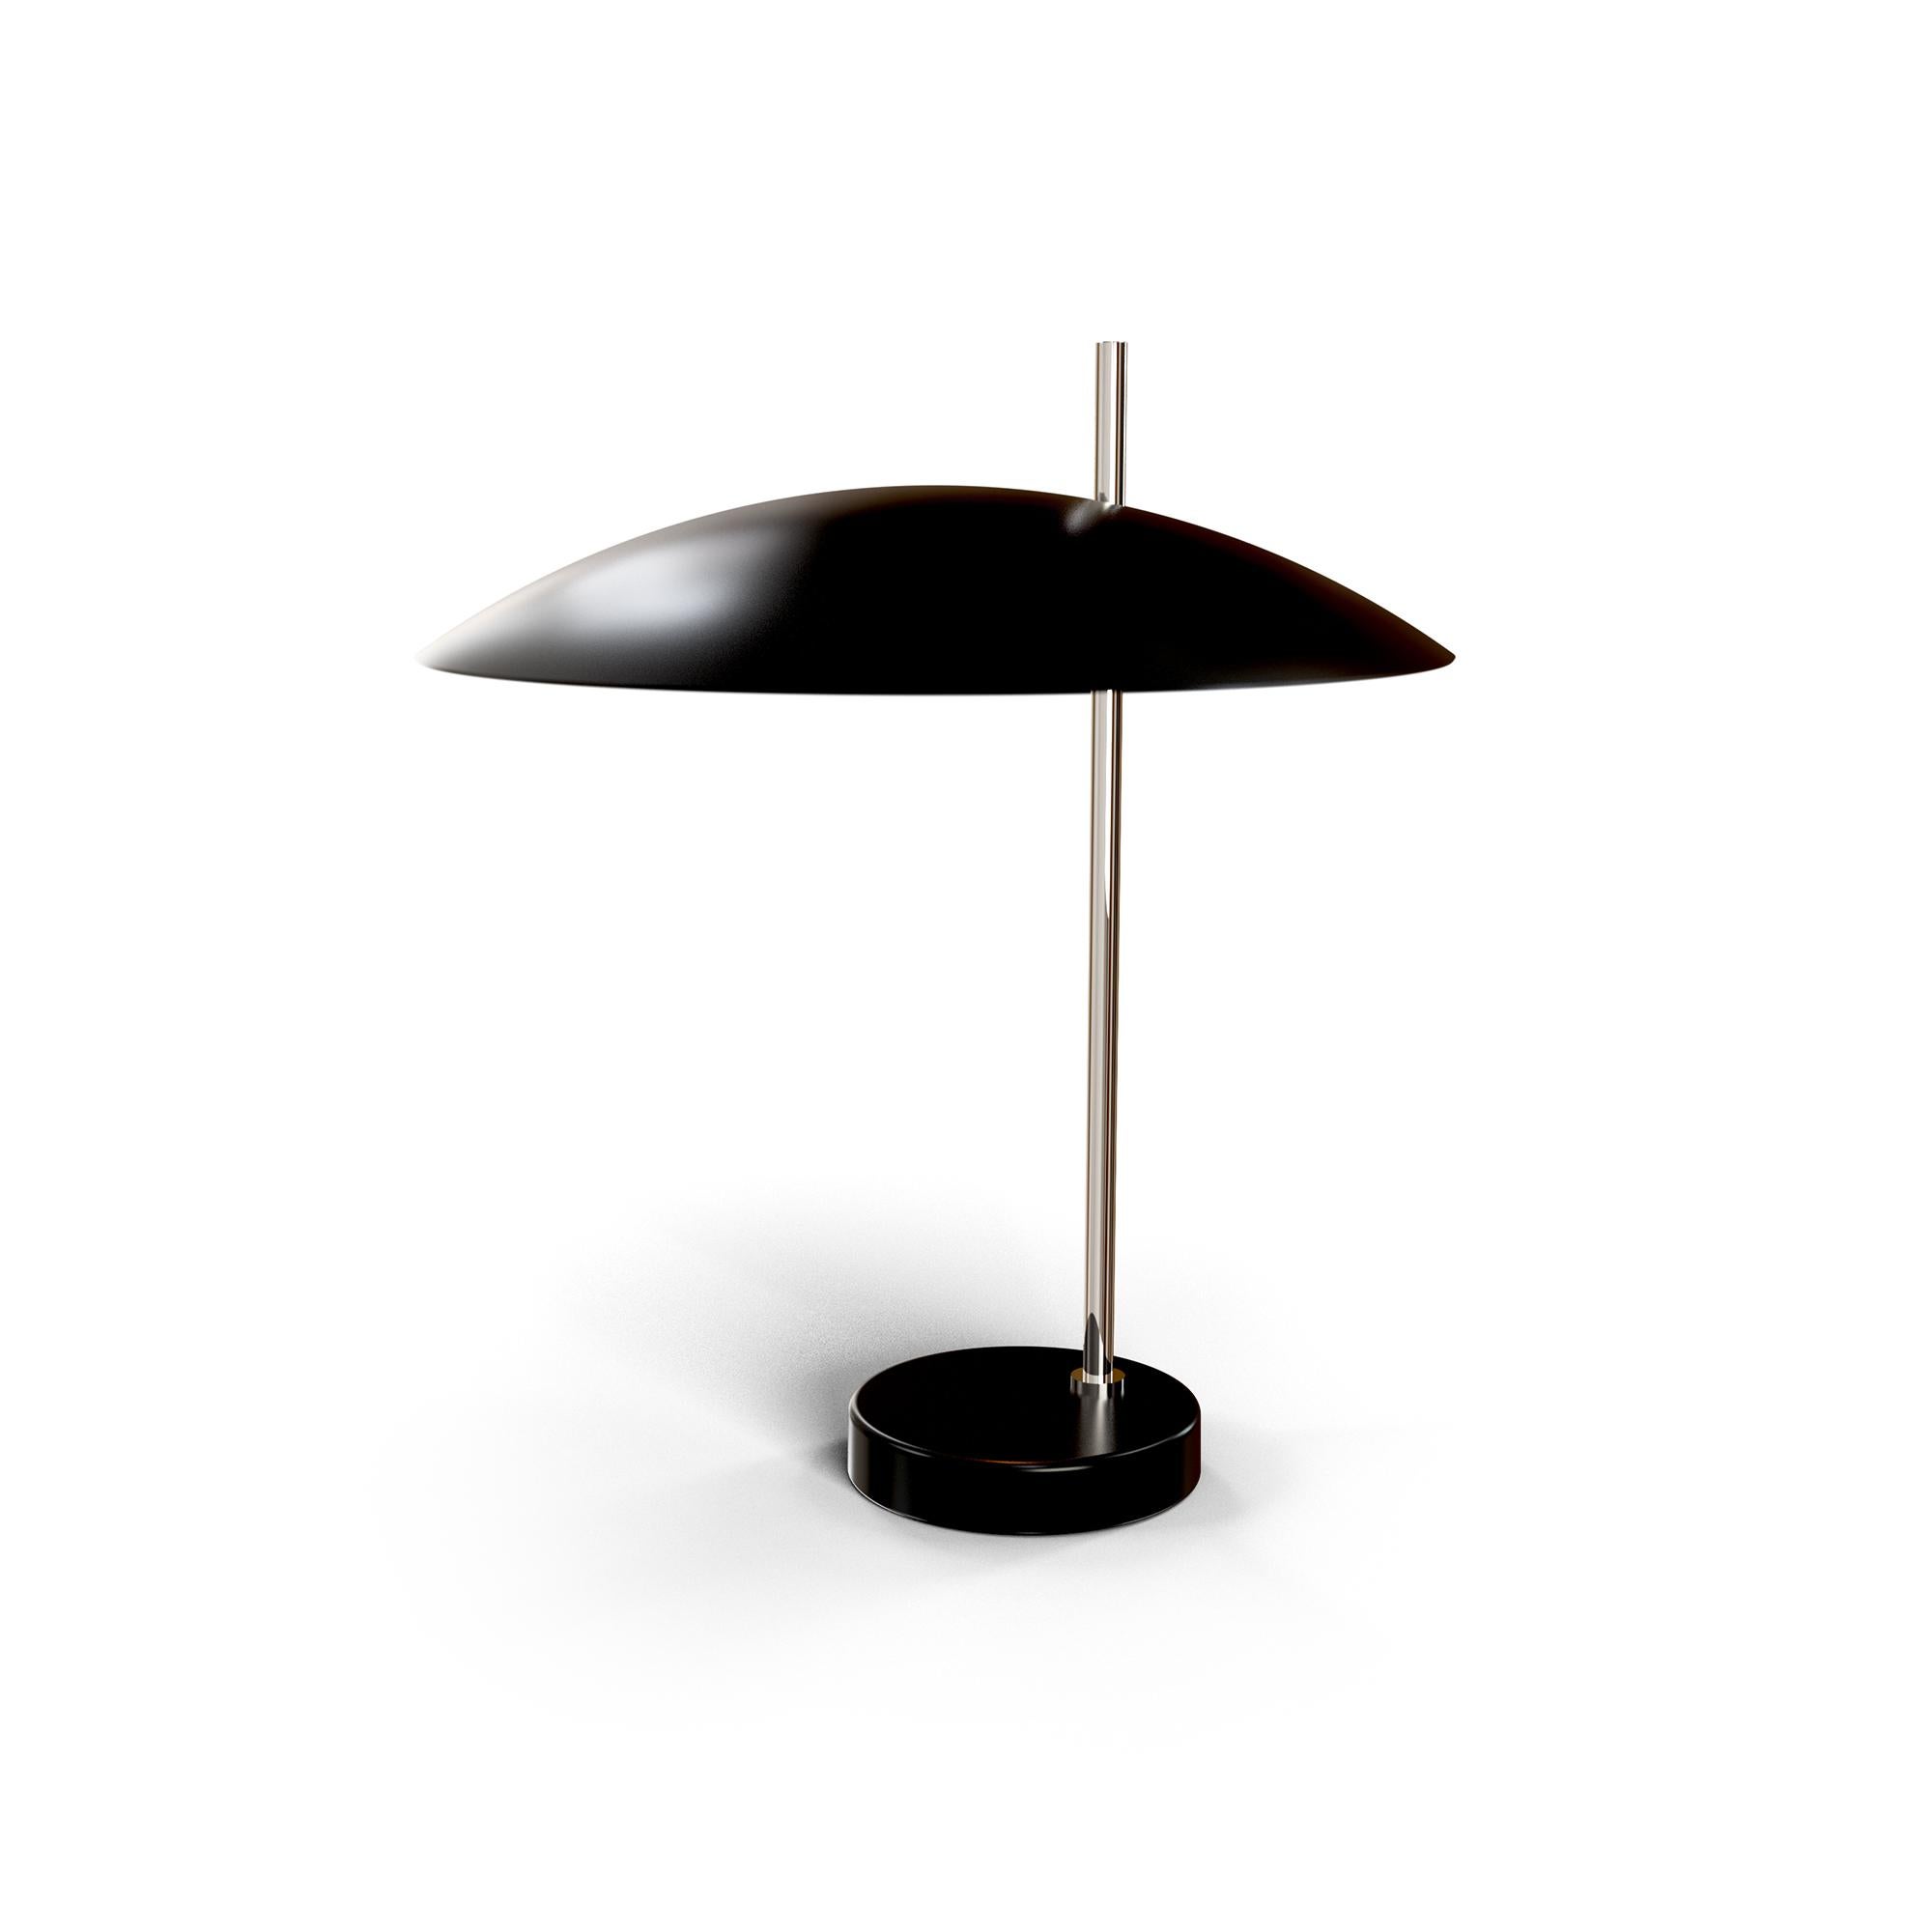 Chrome 1013 Table Lamp by Disderot
Limited Edition. 
Designed by Pierre Disderot.
Dimensions: Ø 34,1 x H 39,77 cm.
Materials: Chrome and black metal.

Delivered with authentication certificate. Made in France. Available in brushed brass, golden